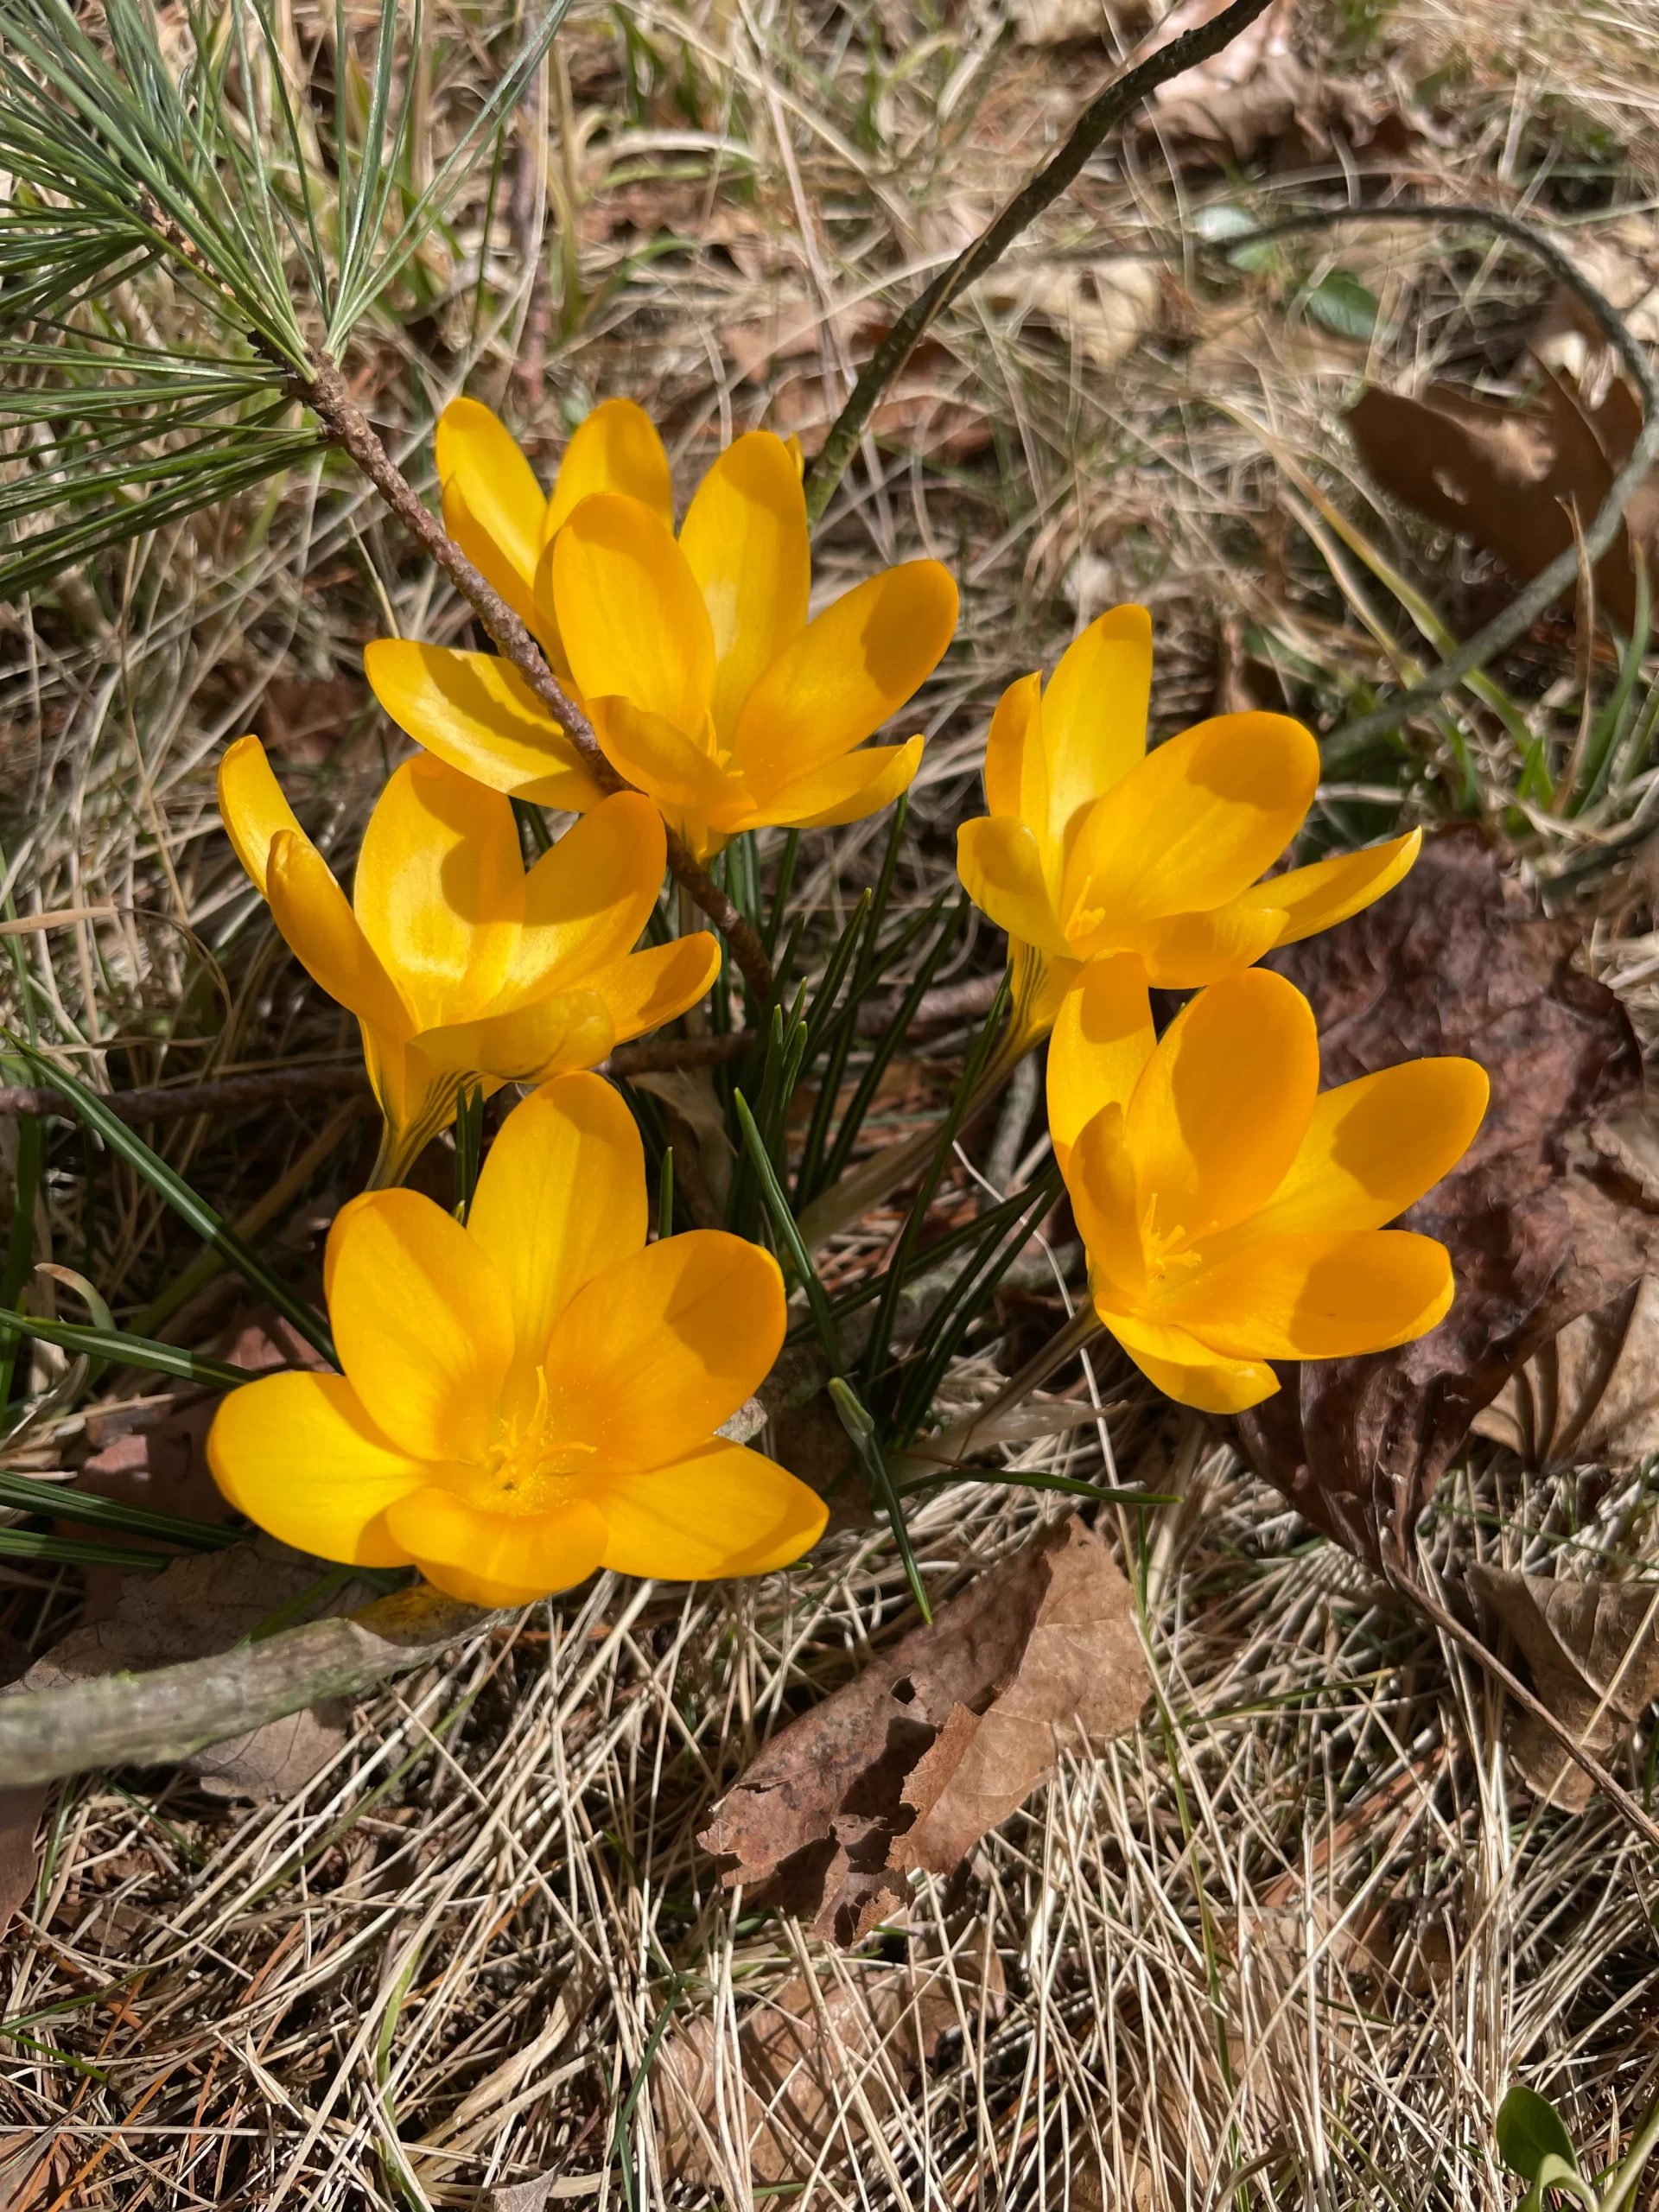 Yellow flowers Ithaca NY Taylor Place March 23, 2023 by Paul Langan